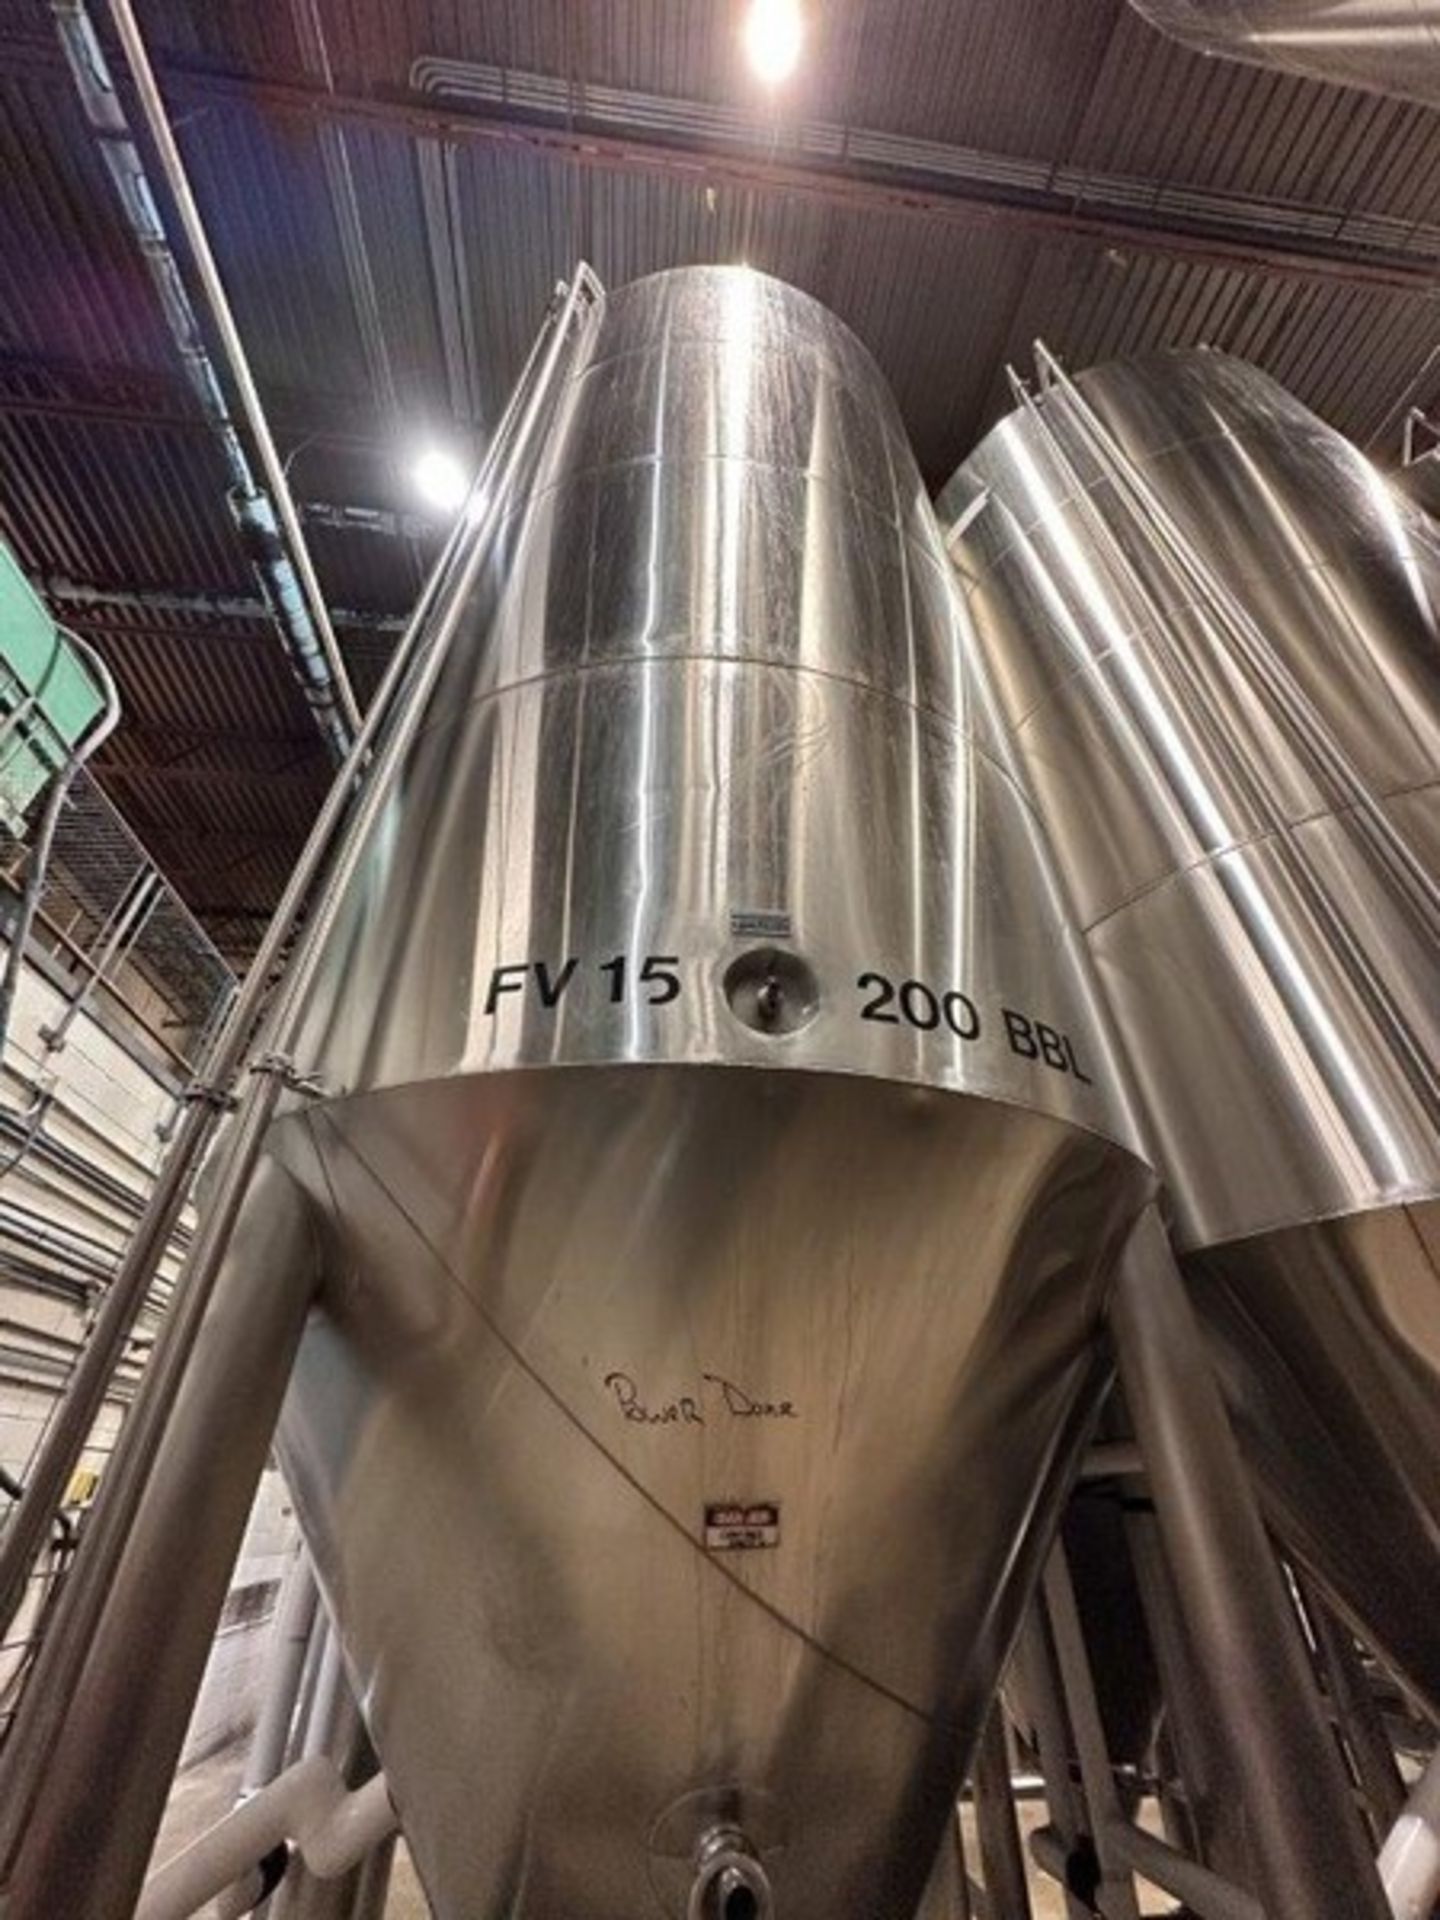 200 BBL (7991 gallons) Vertical Cone Bottom 304 Stainless Steel Jacketed Vessel. Manufactured by JV - Bild 3 aus 7